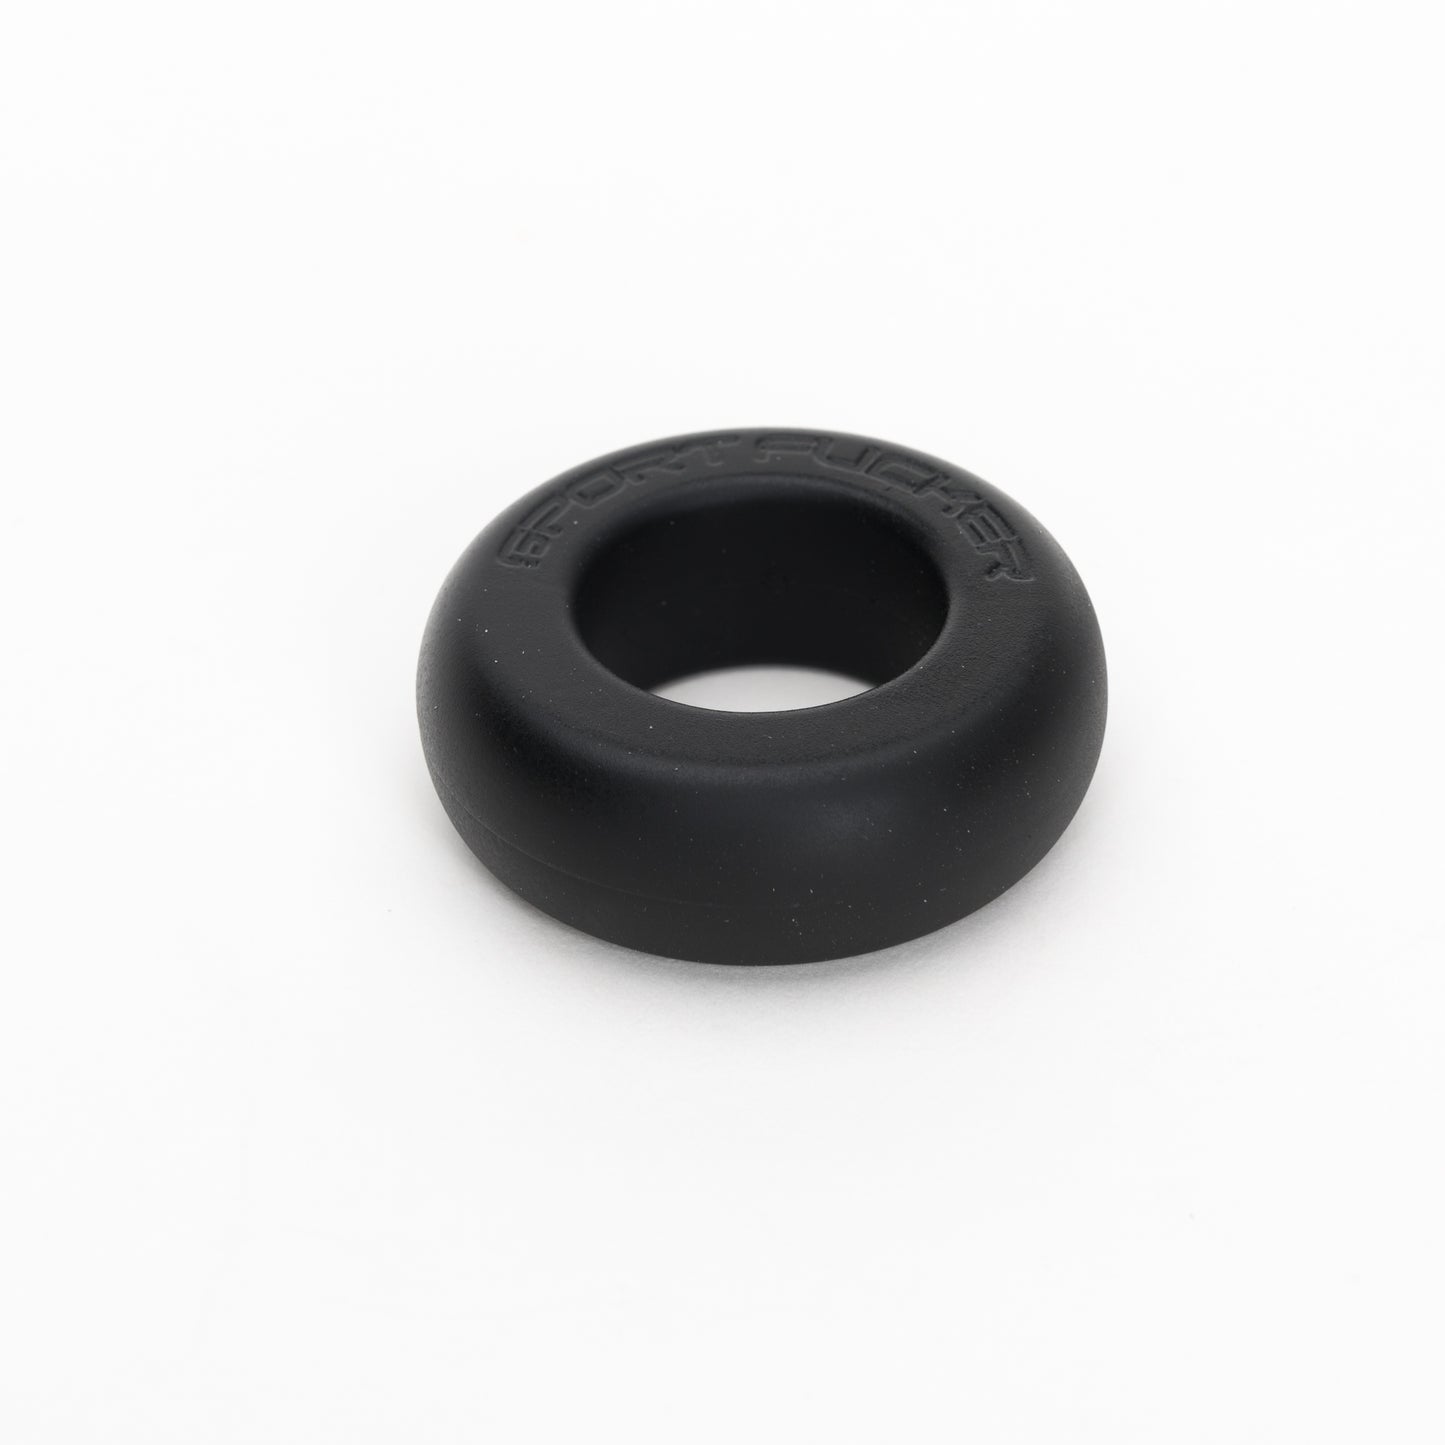 Muscle Ring Black - Just for you desires